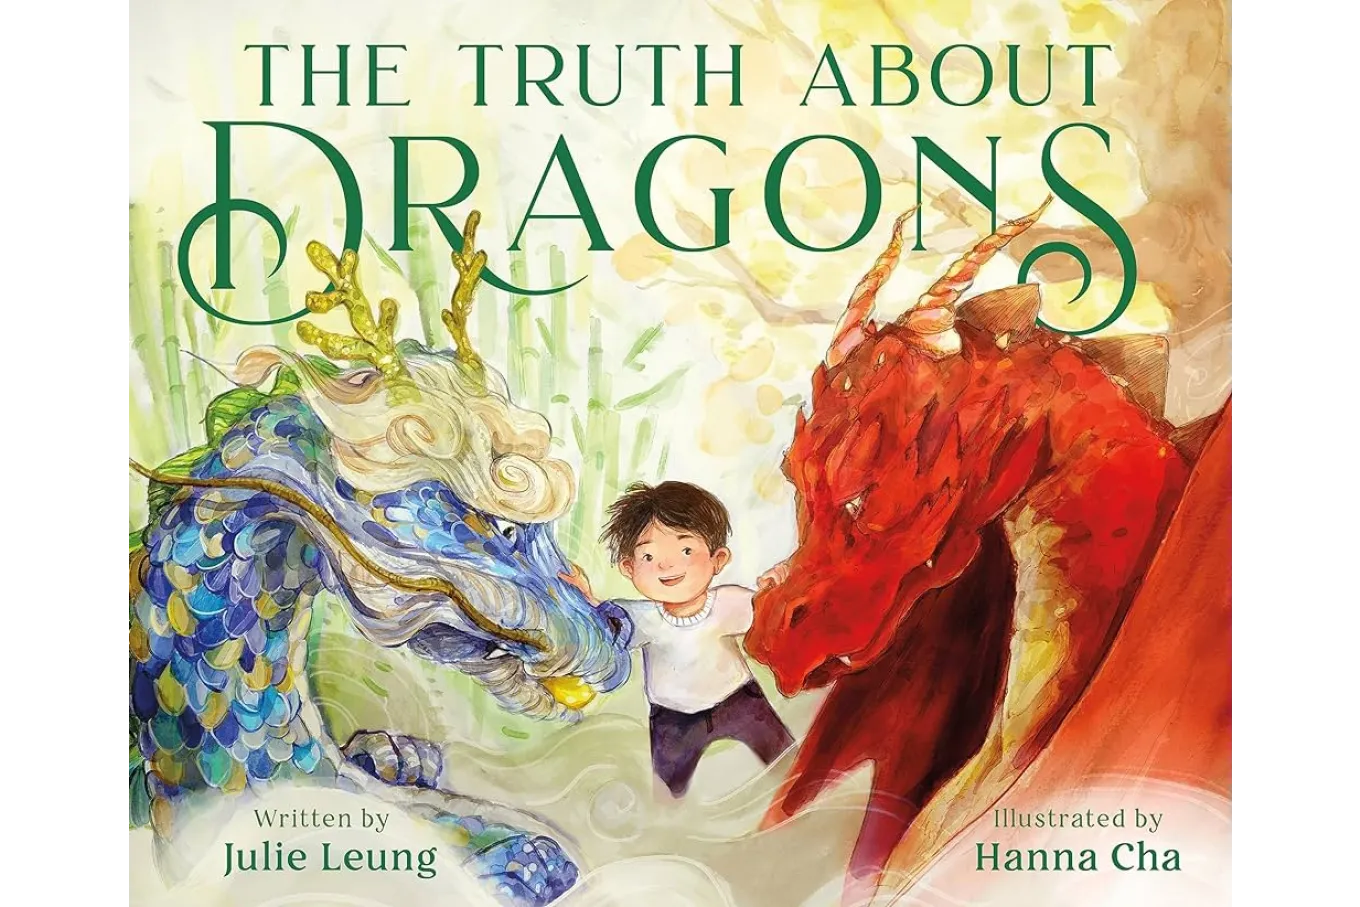 Cover of the truth about dragons